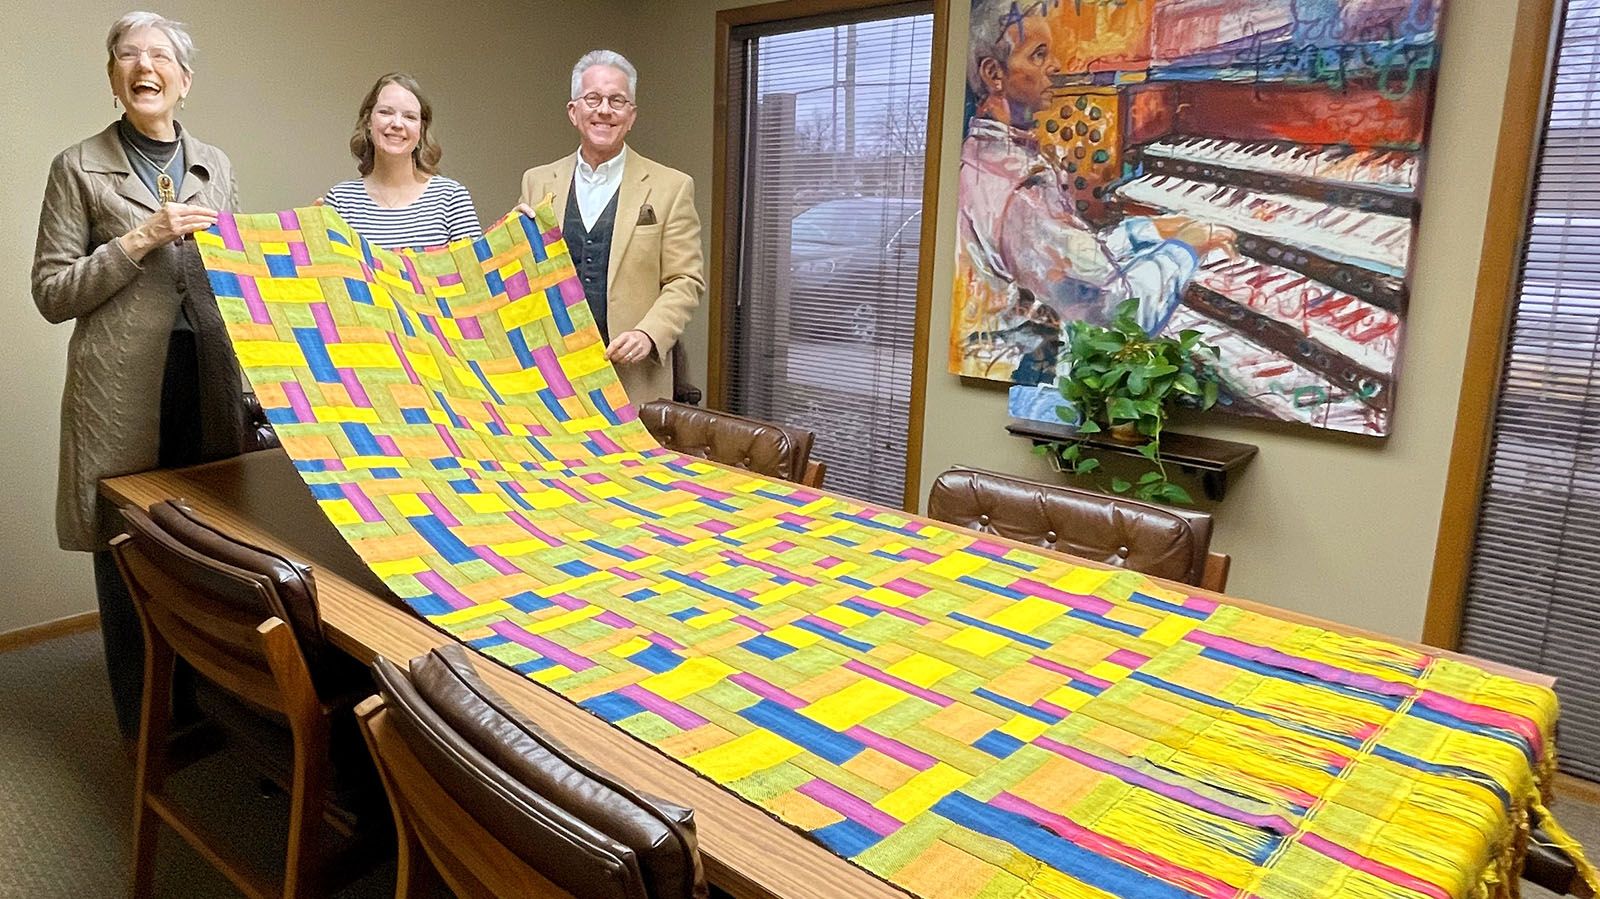 Sara Nordling, left, displays her tapestry to Heatland Sings Associate Artistic Director Natalie Young and Maestro Robert Nance.